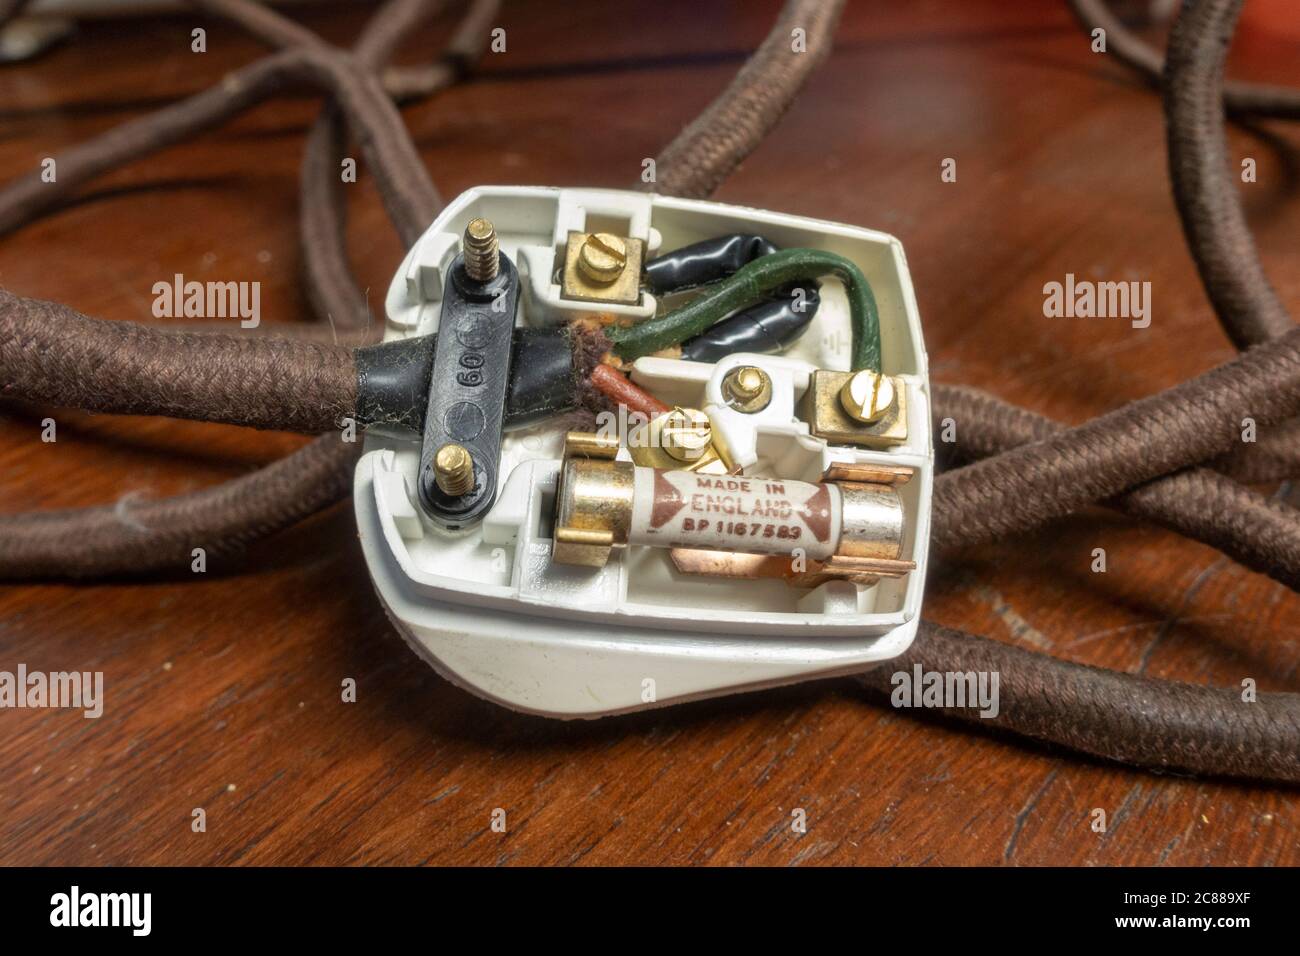 An old UK plug with black (neutral), green (earth) and brown (live) wires  Stock Photo - Alamy